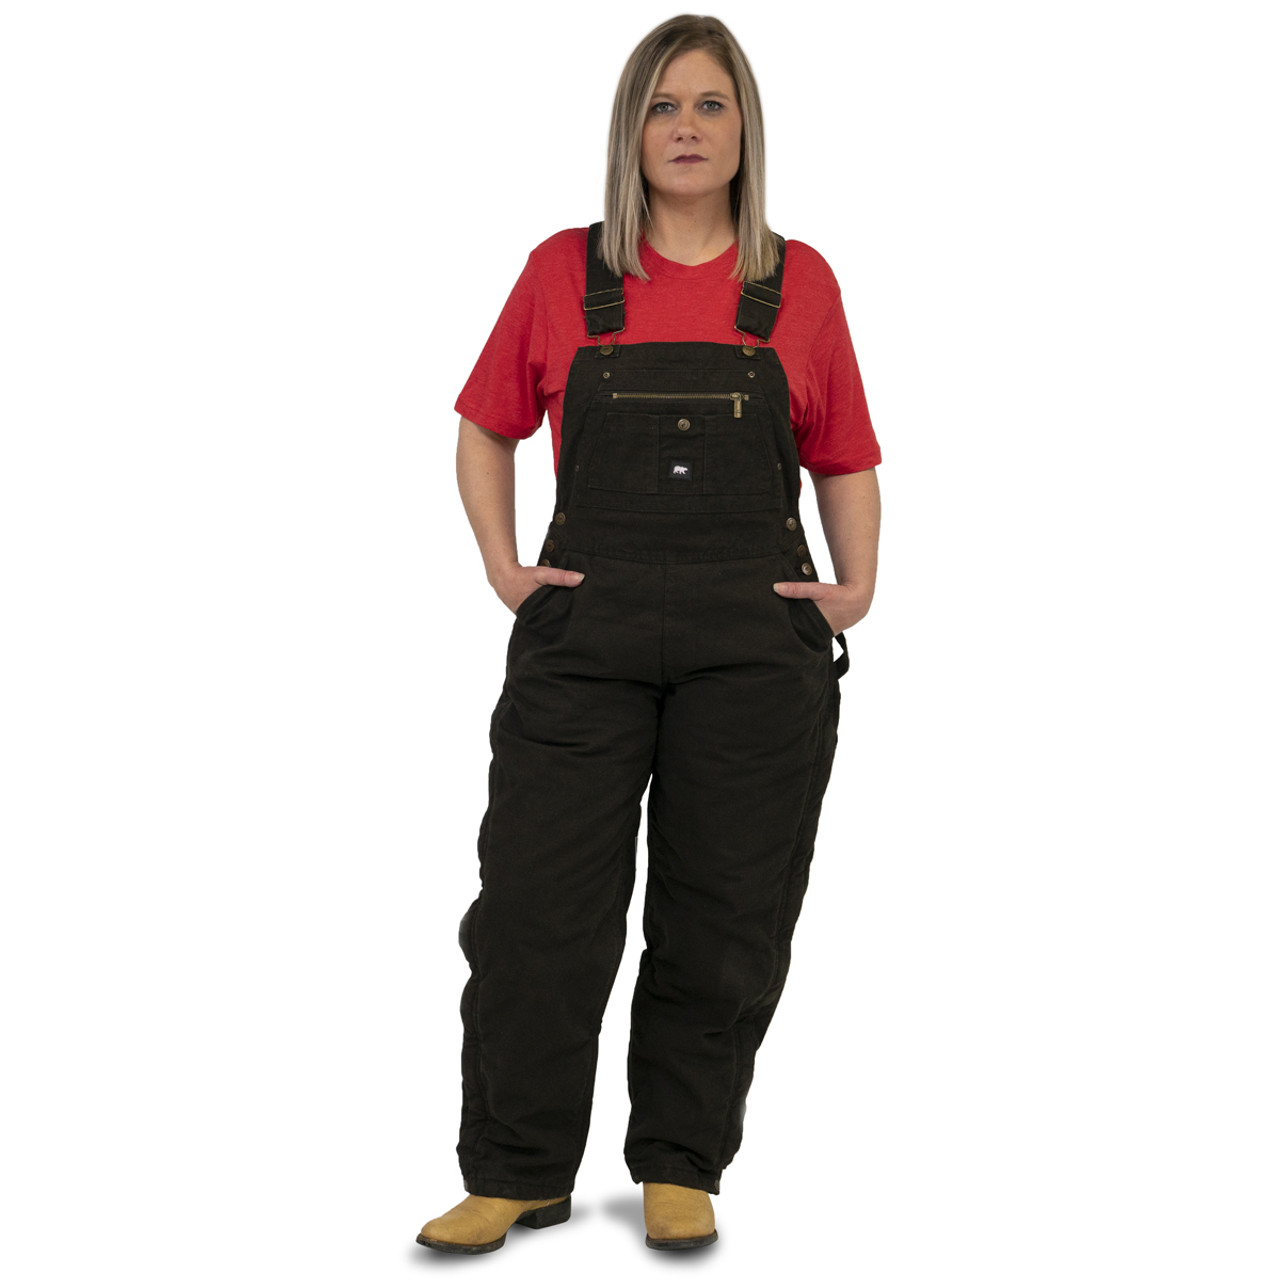 Key Apparel Insulated to Waist Bib Overall for Her - 290.24 - M